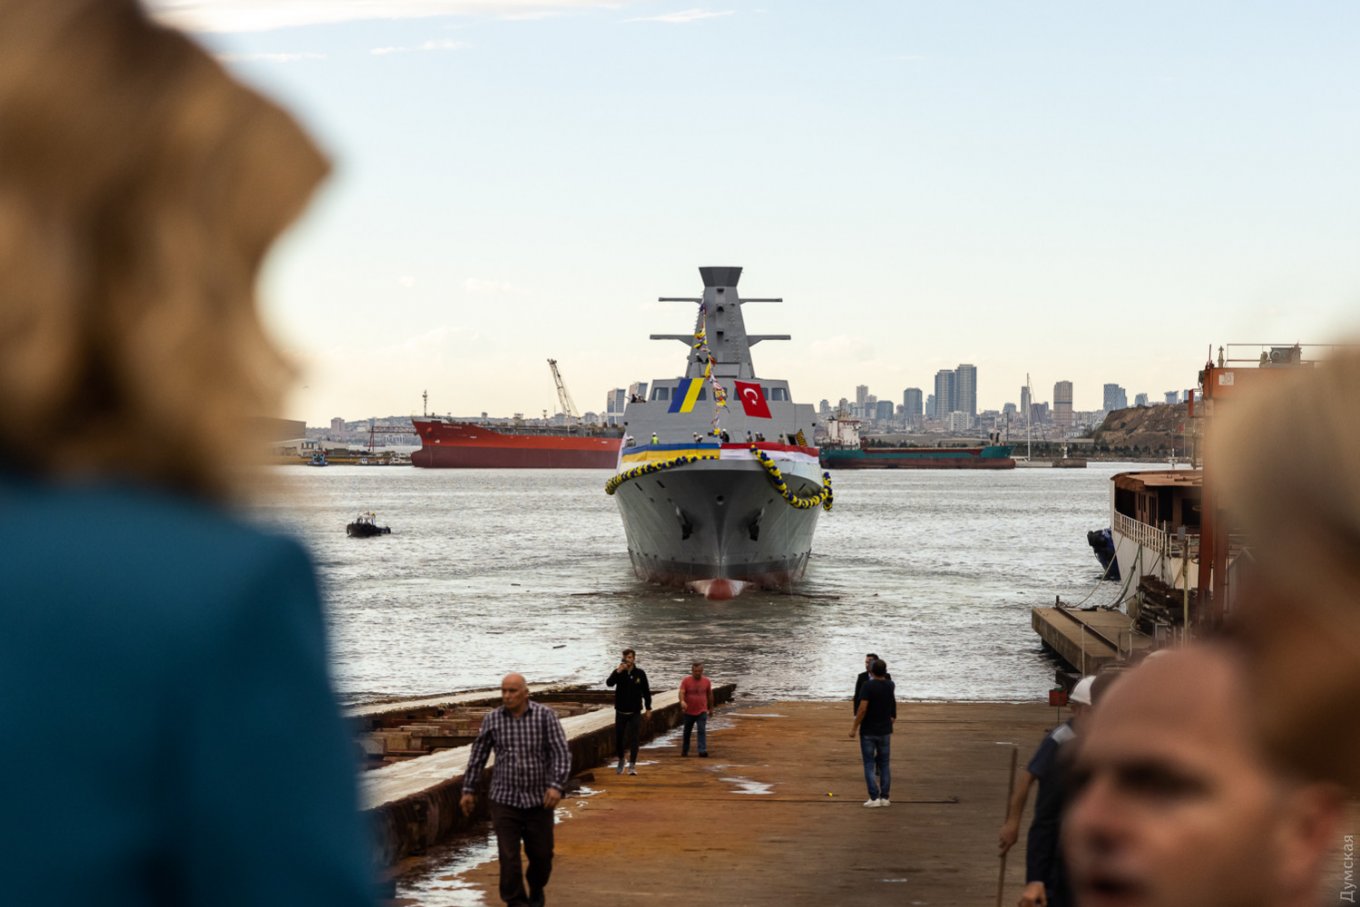 Ukraine's future MILGEM-class corvette Hetman Ivan Mazepa while being launched, The Hull of Future Flagship of Ukraine’s Navy is Made of Steel Produced in Heroic Mariupol, Defense Express